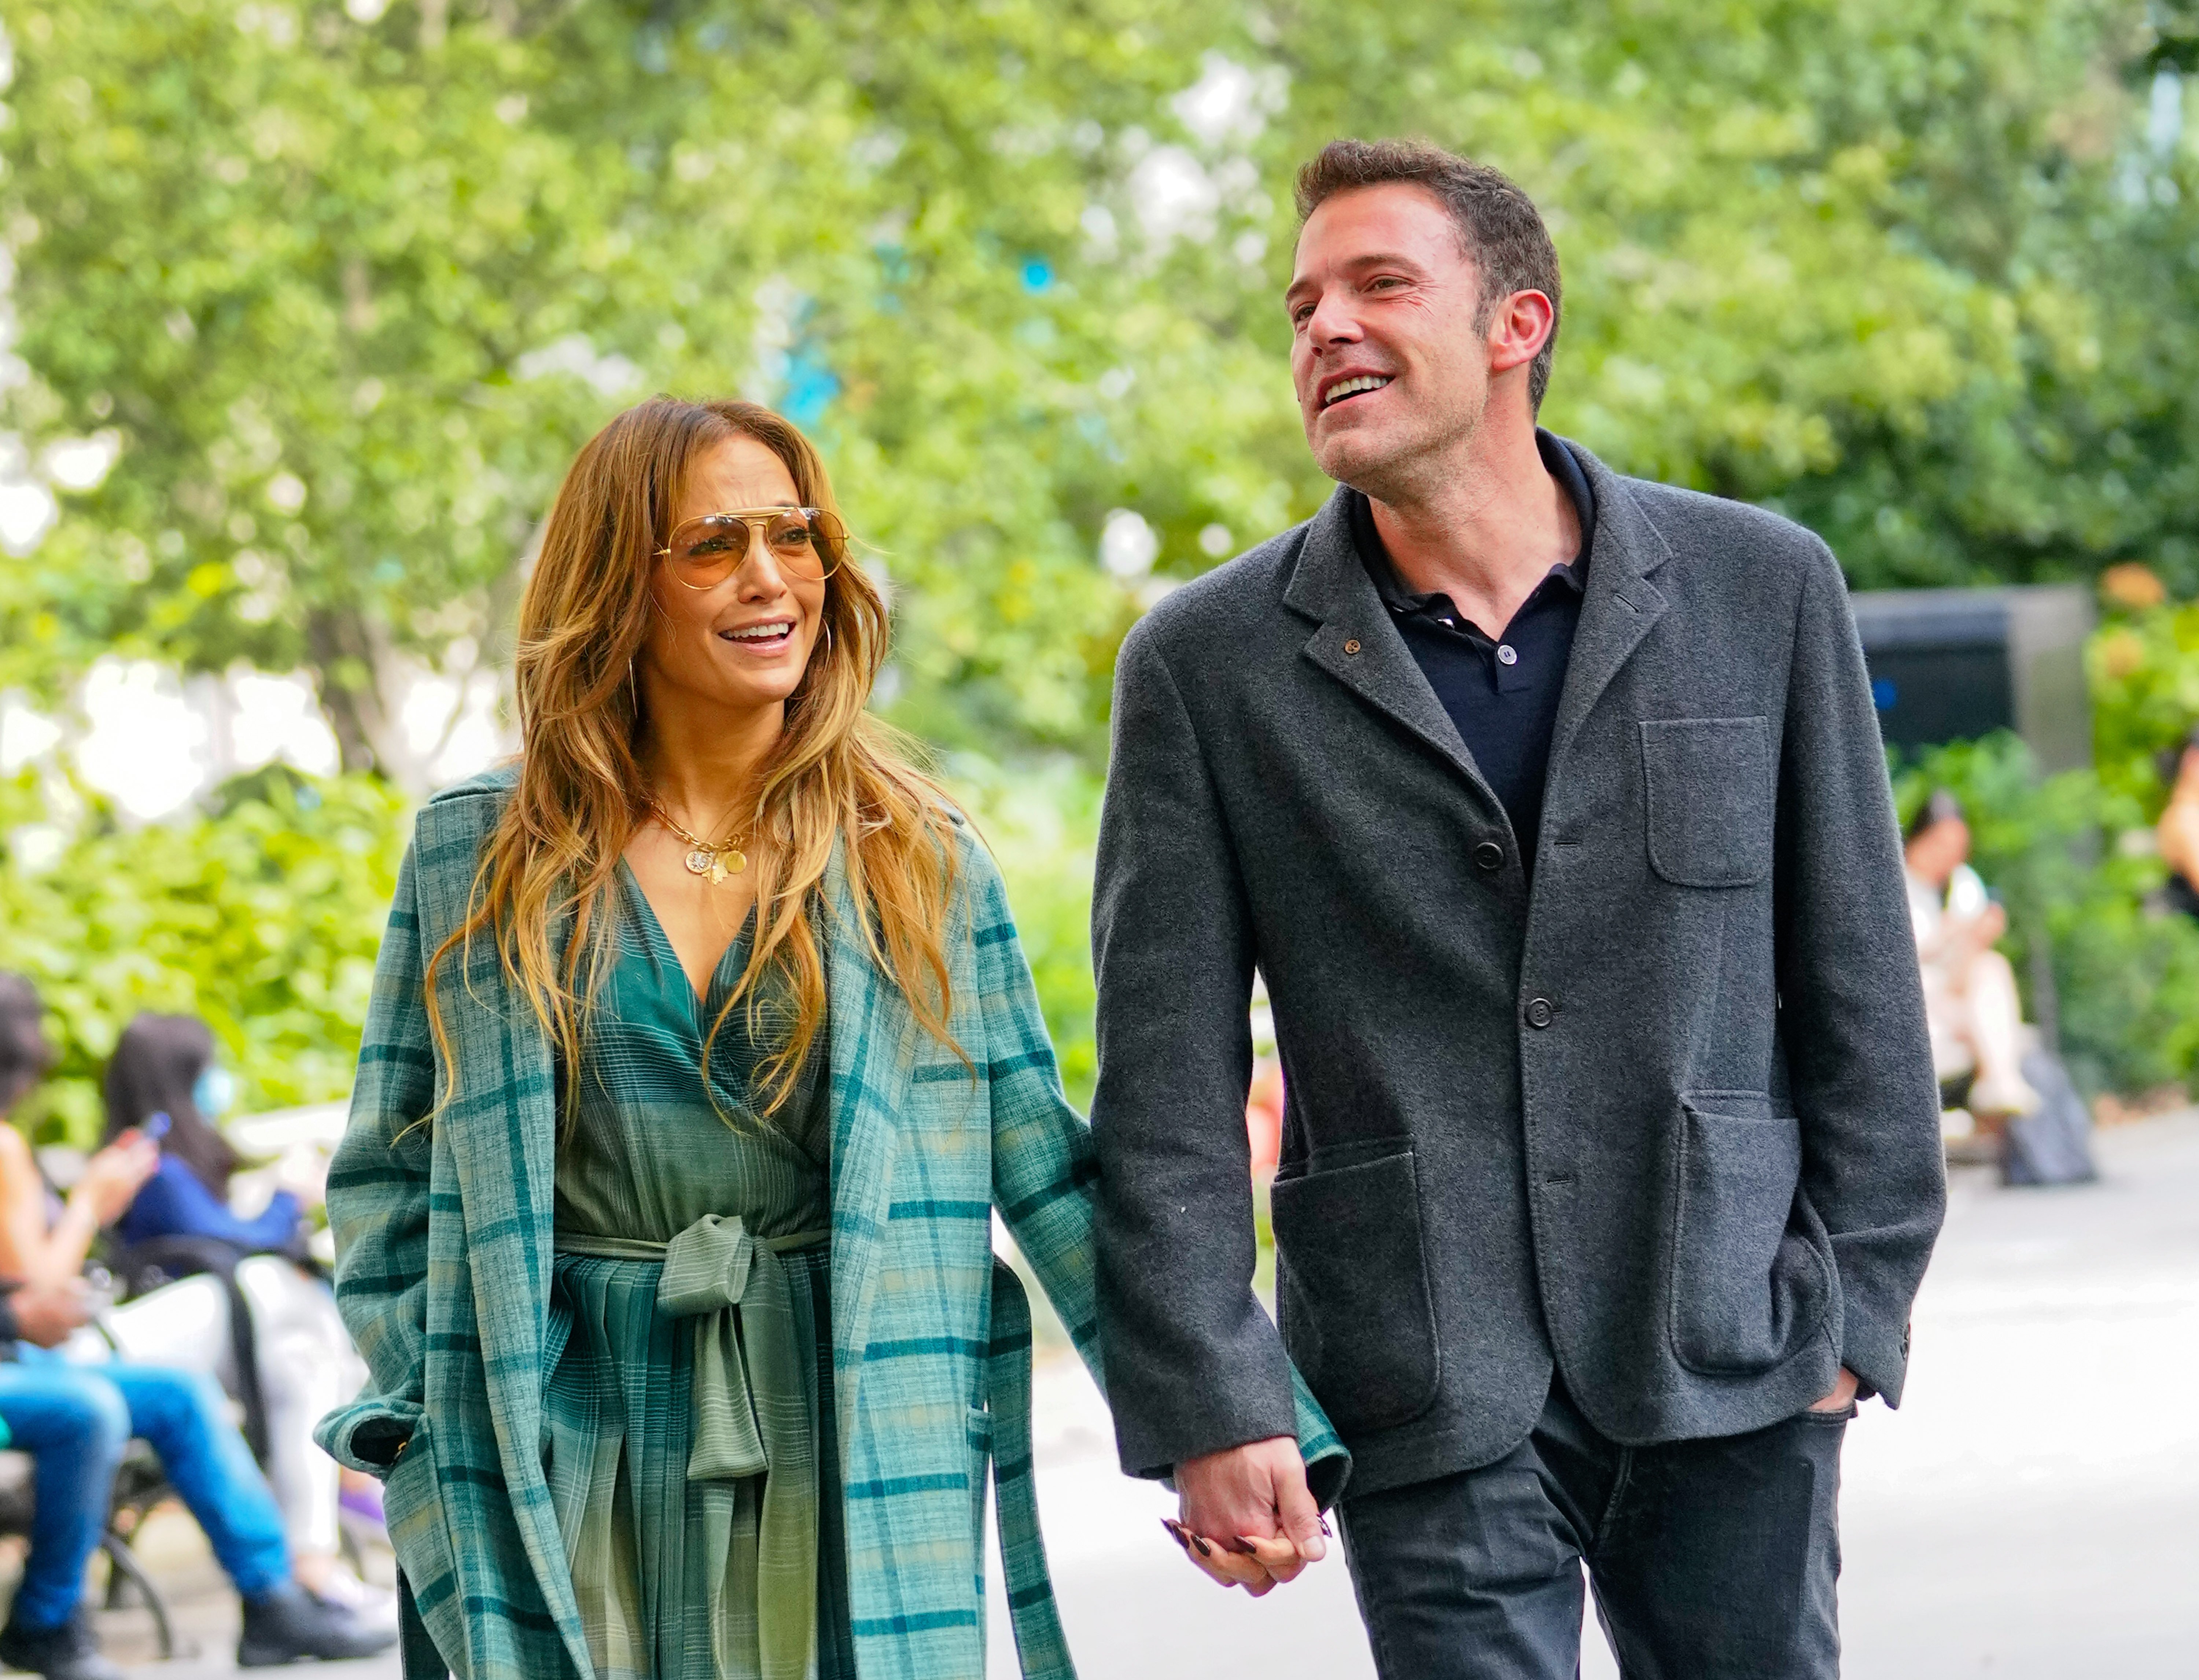 Singer Jennifer Lopez and actor Ben Affleck spotted on September 25, 2021 in New York City.┃Source: Getty Images